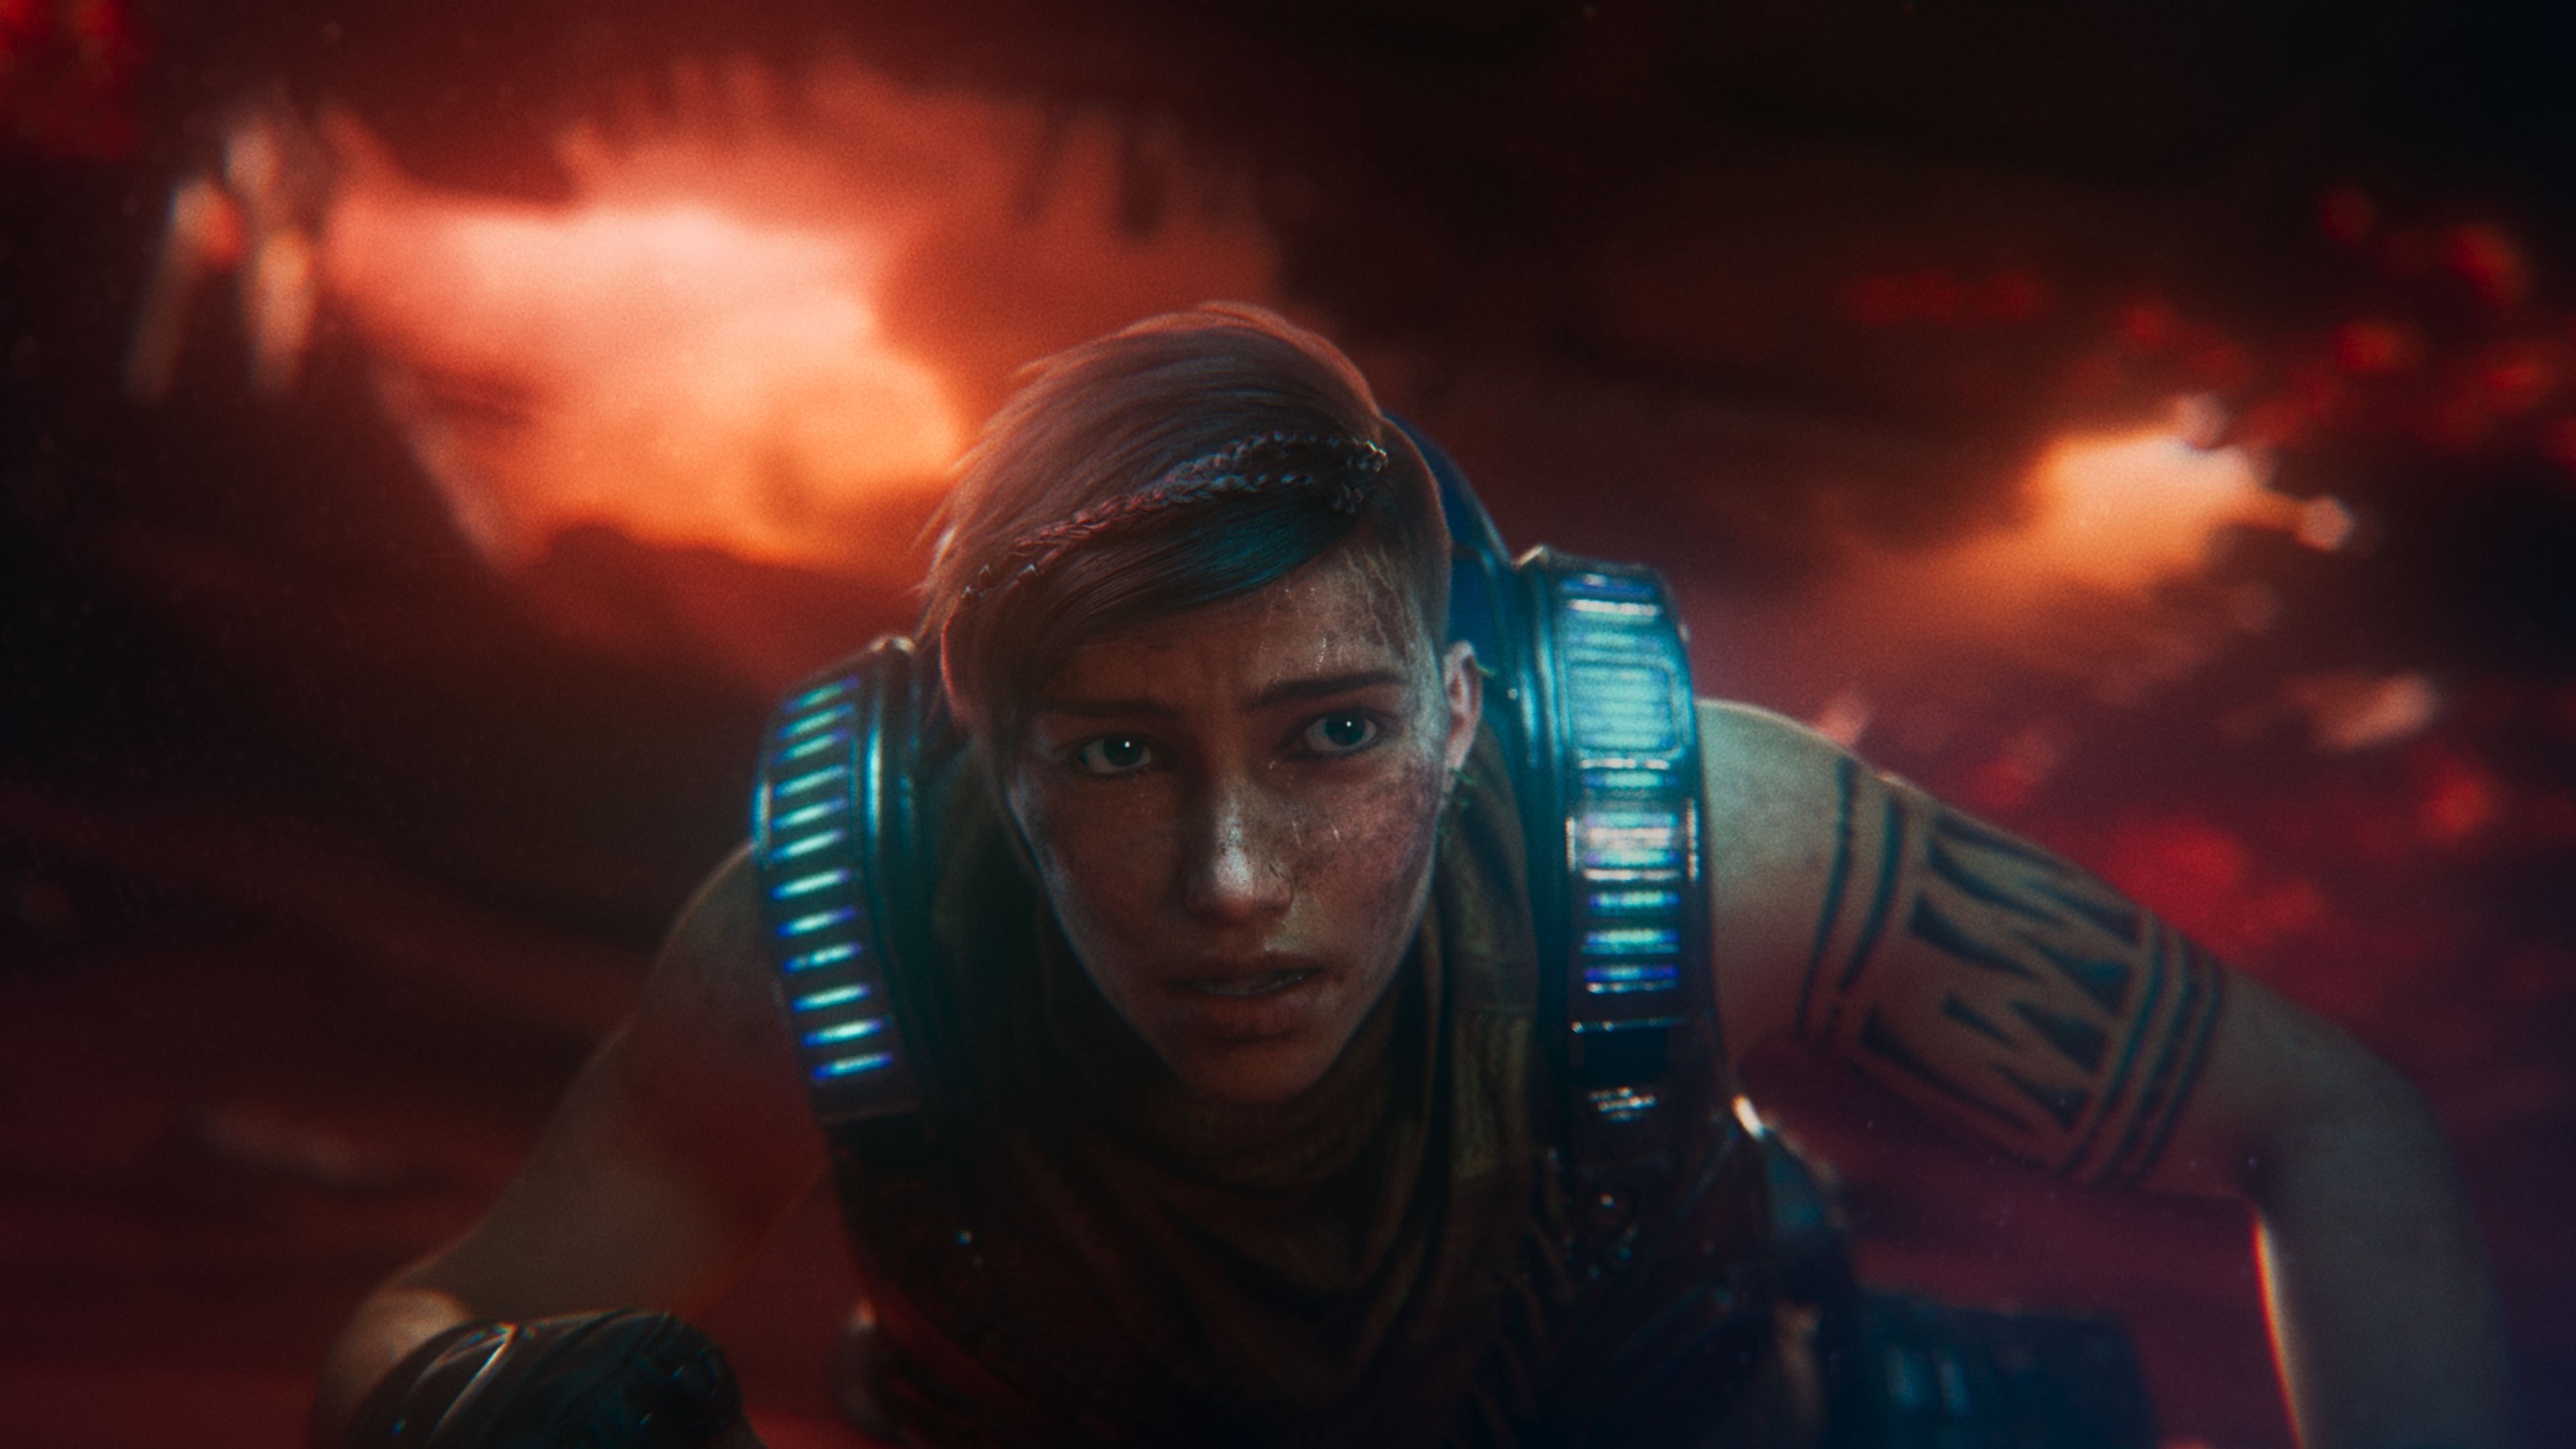 access begins 'Gears 5' Ultimate Edition owners and Xbox Pass Ultimate members | Windows Experience Blog